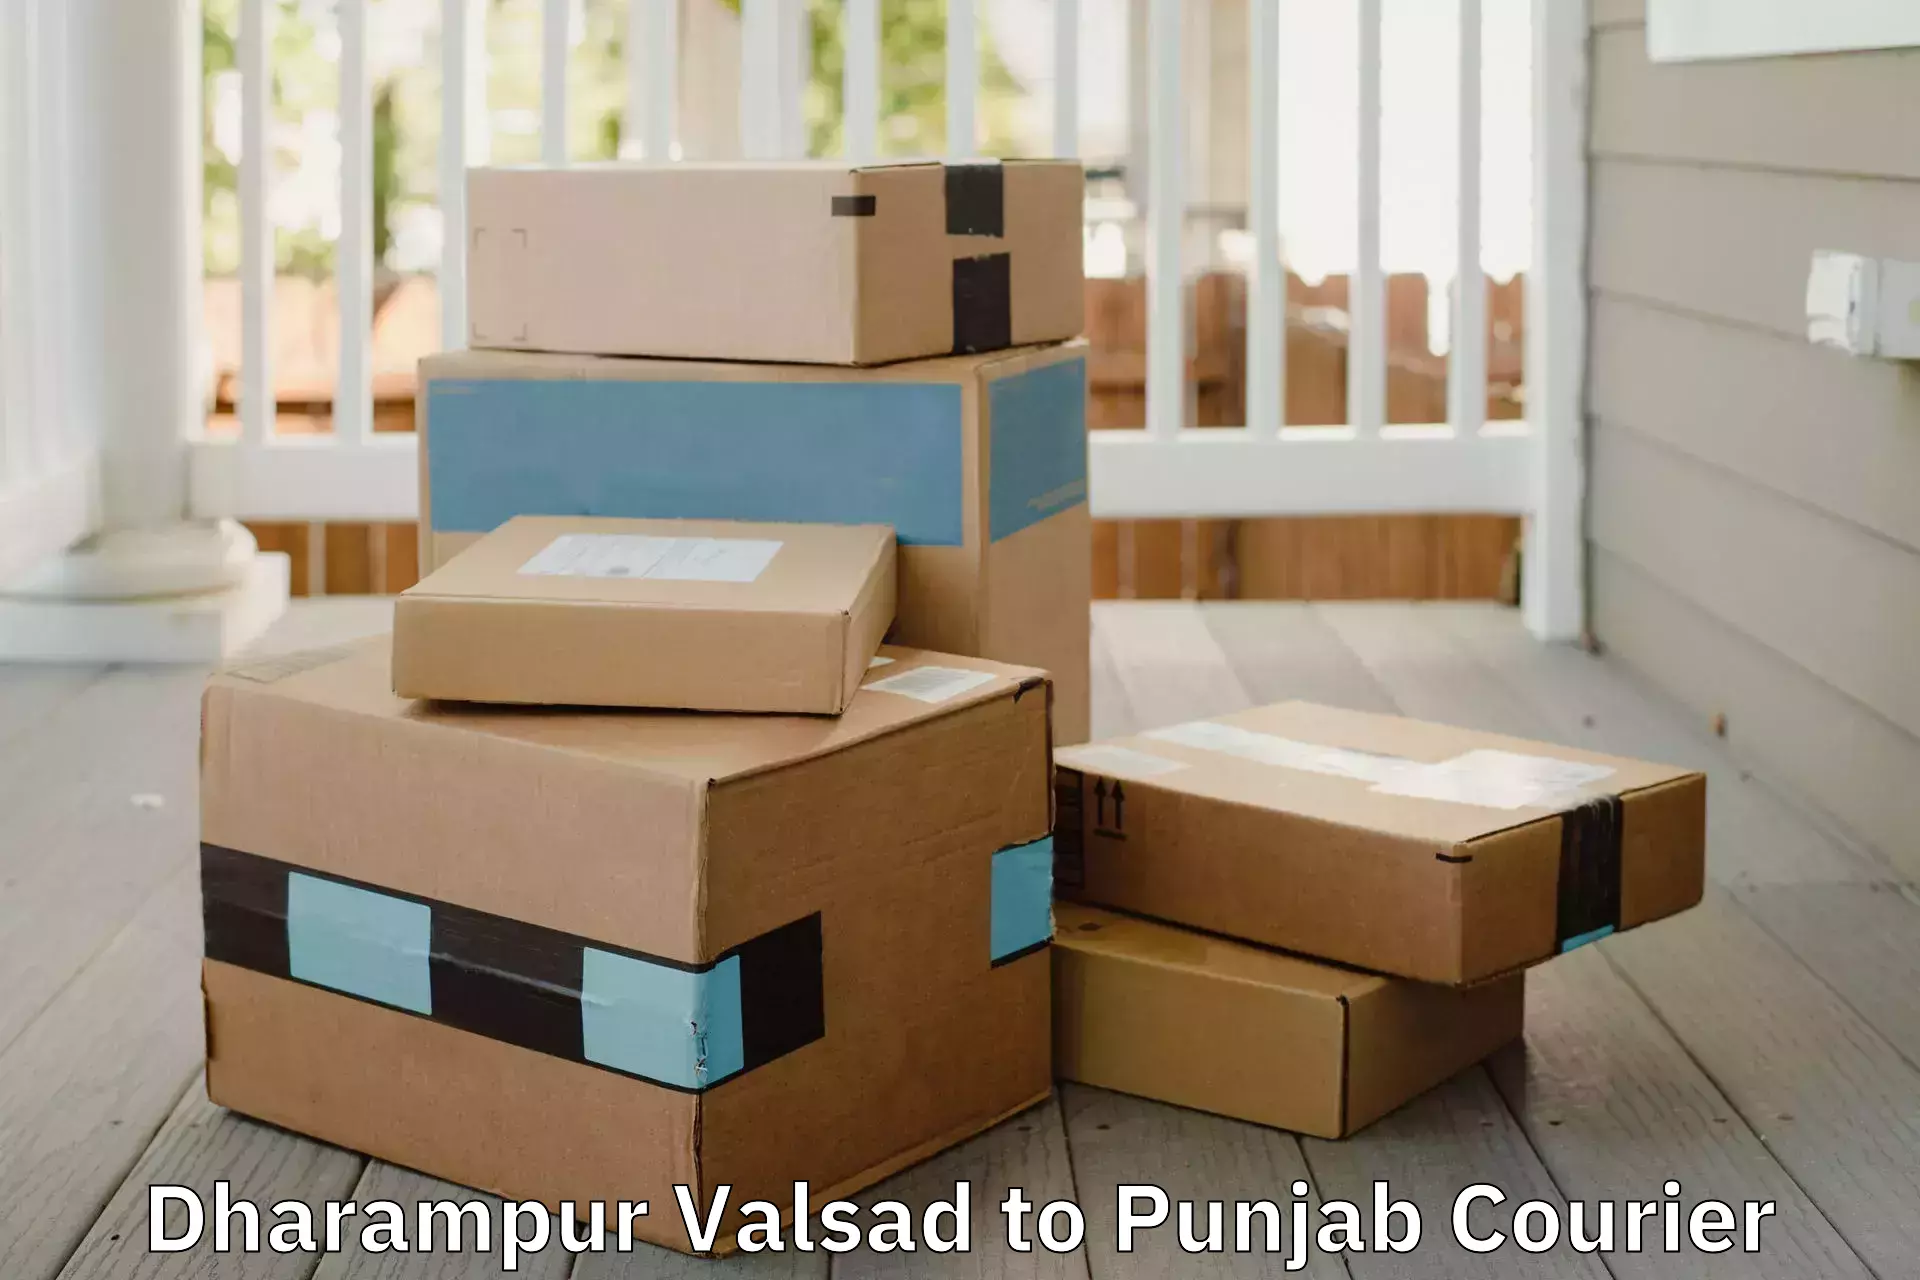 Skilled furniture movers Dharampur Valsad to Ajnala